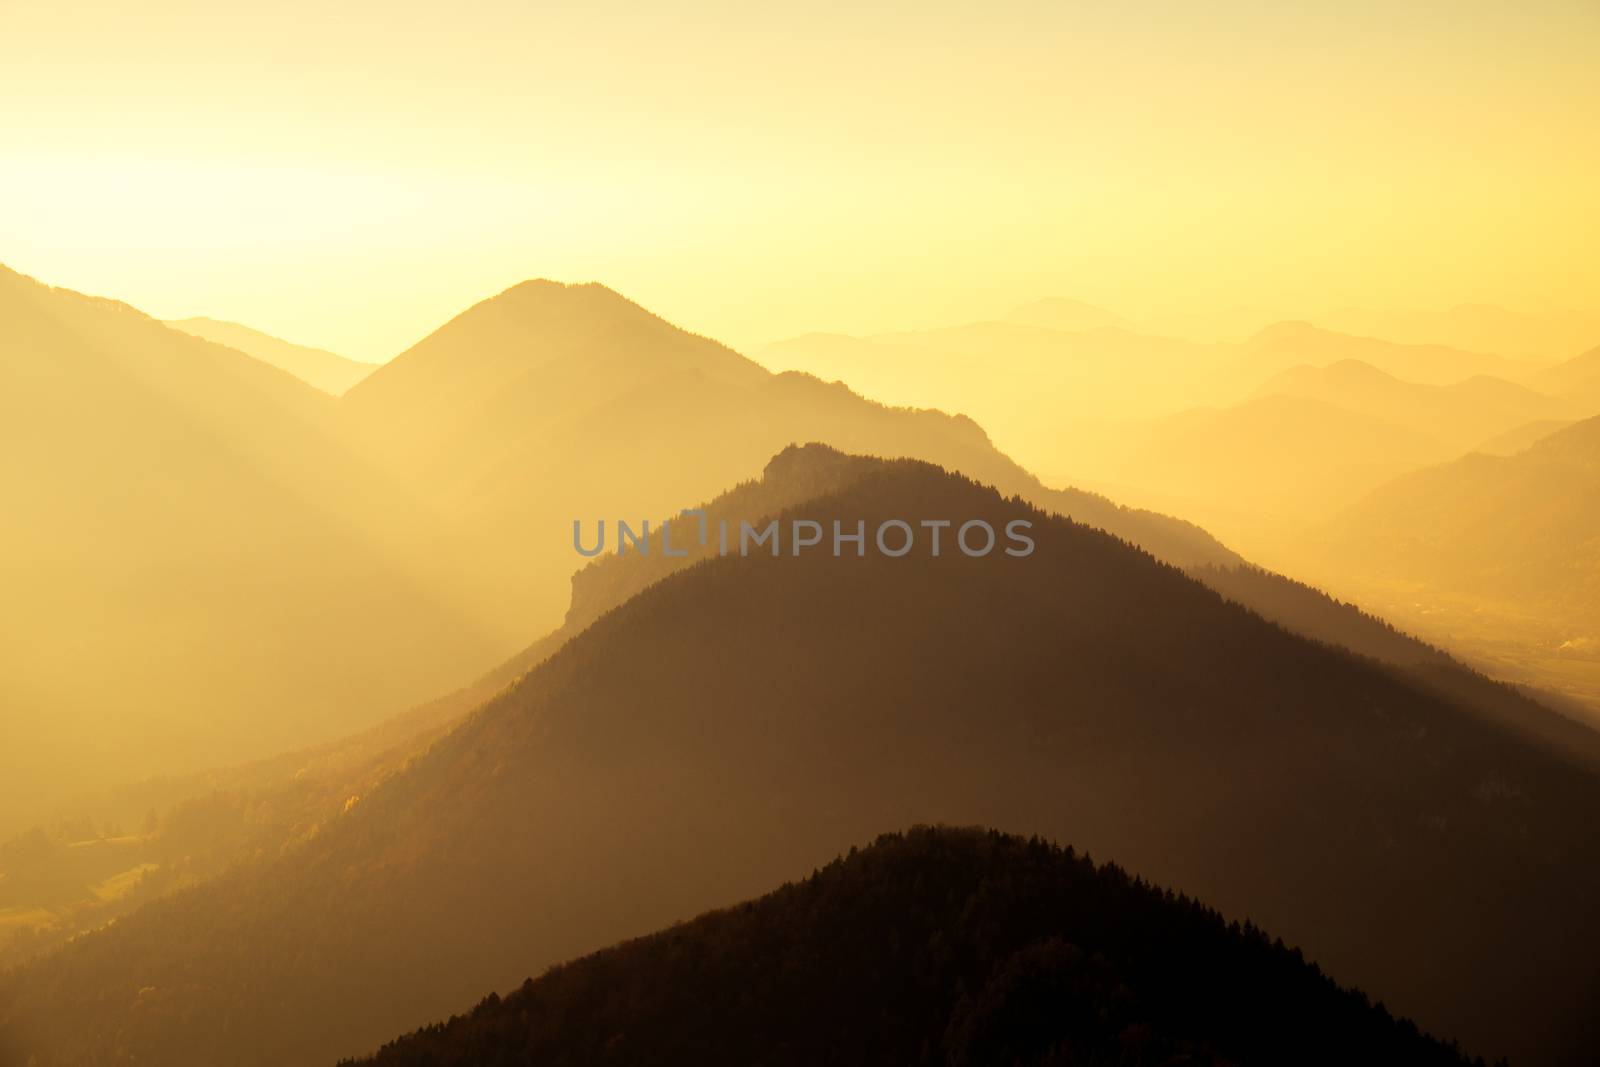 Scenic view of mountains and hills silhouette at sunset, Mala Fatra, Slovakia